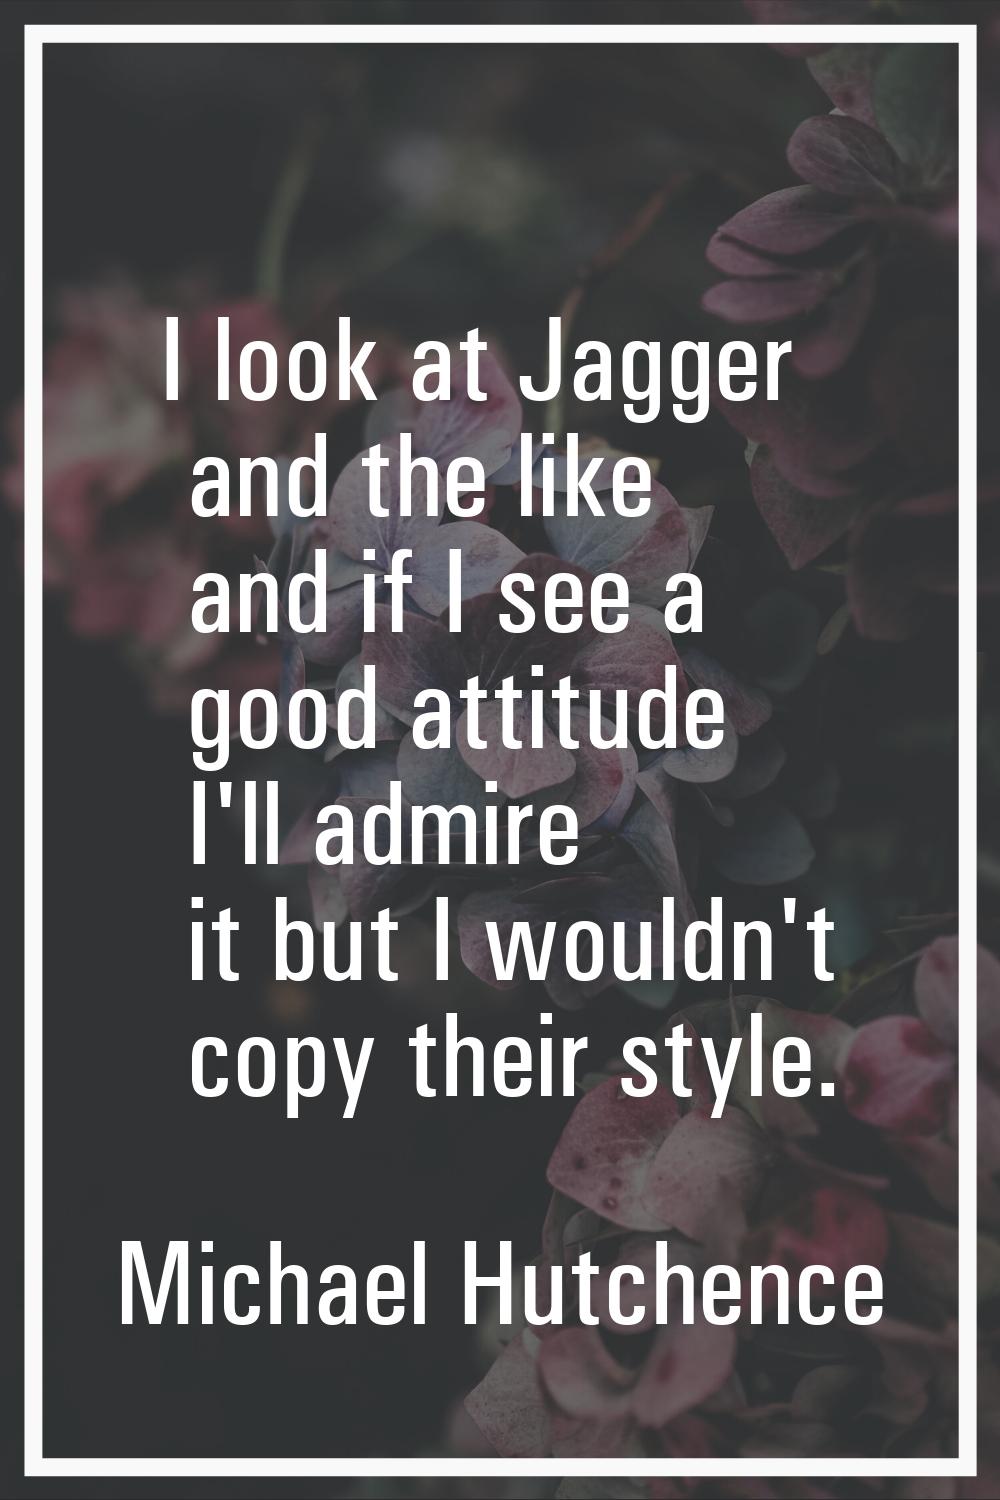 I look at Jagger and the like and if I see a good attitude I'll admire it but I wouldn't copy their